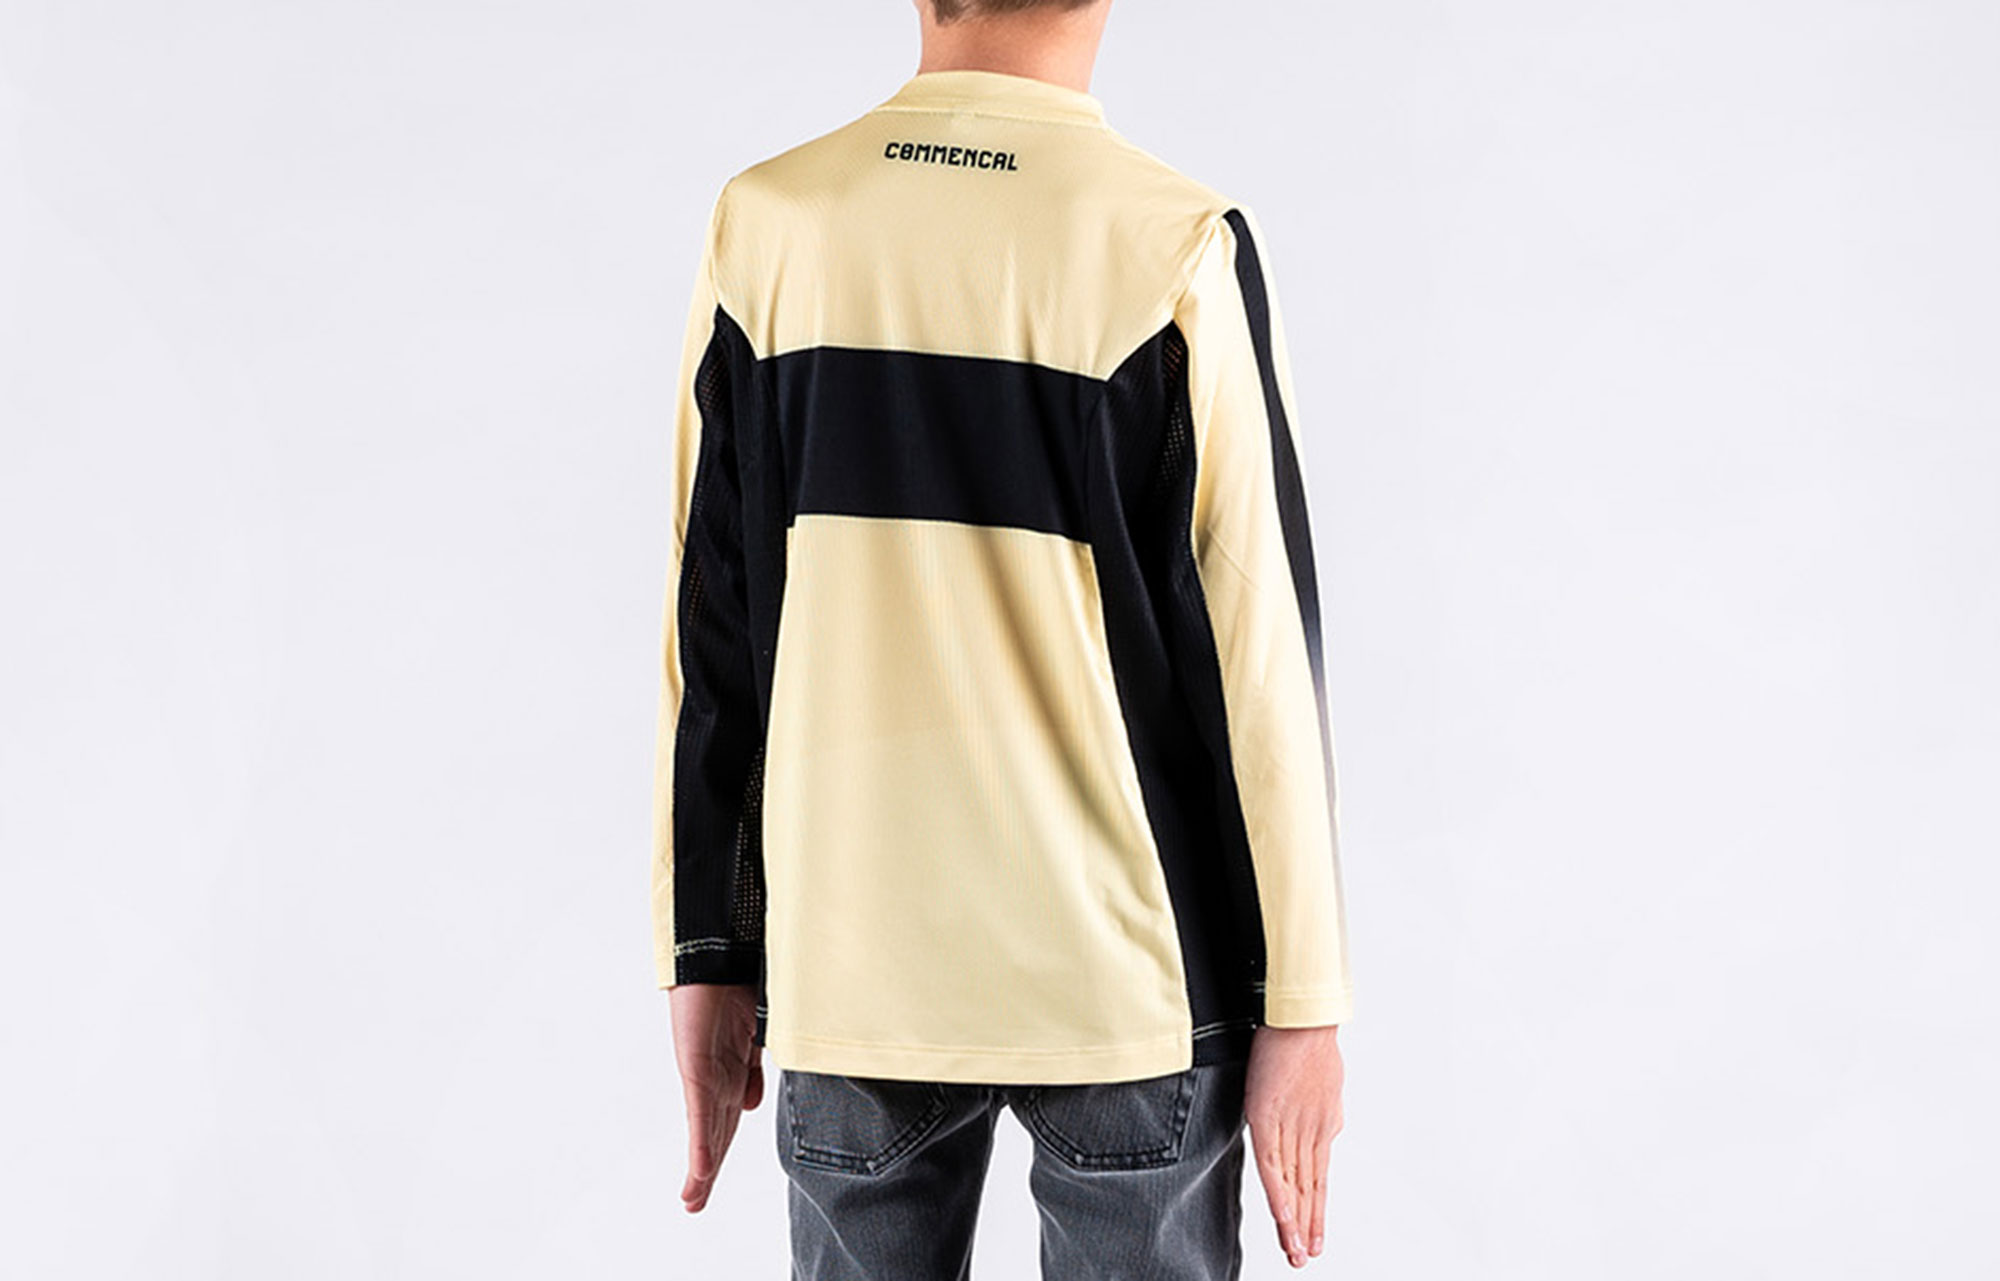 COMMENCAL KIDS LONG SLEEVE RACE JERSEY LIGHT YELLOW image number 0